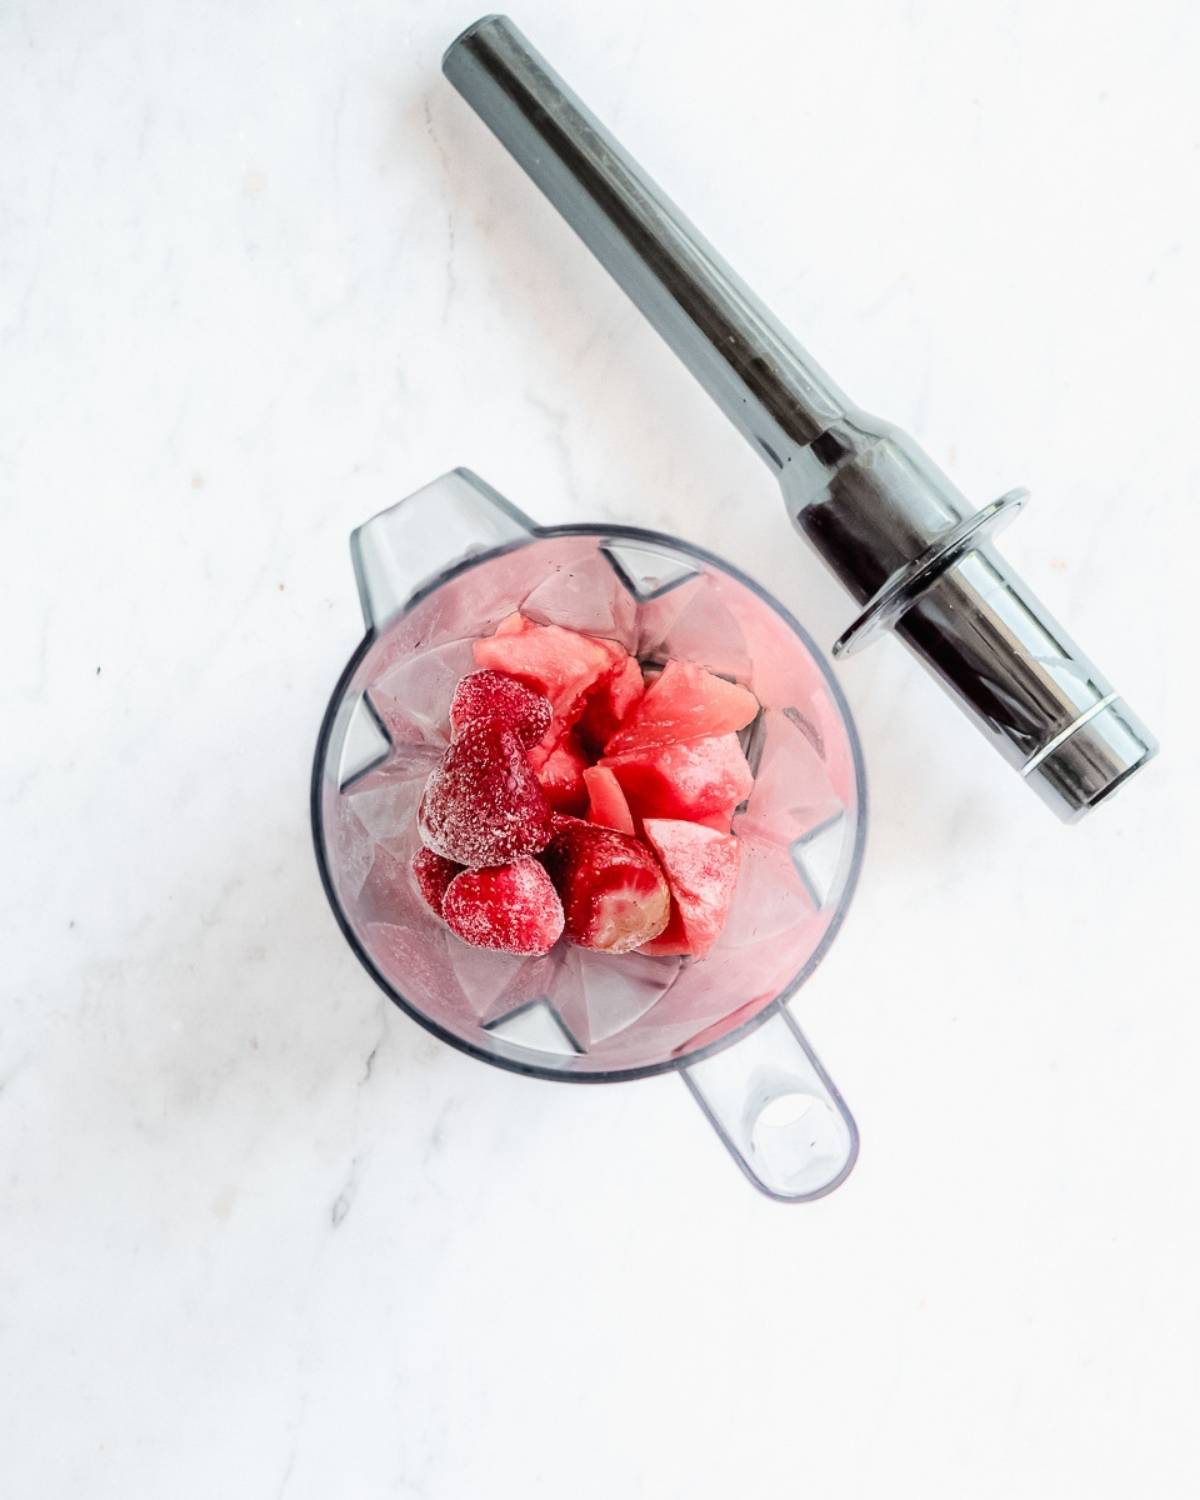 maple syrup, watermelon chunks ,frozen strawberries in a blender with a tamper next to it.